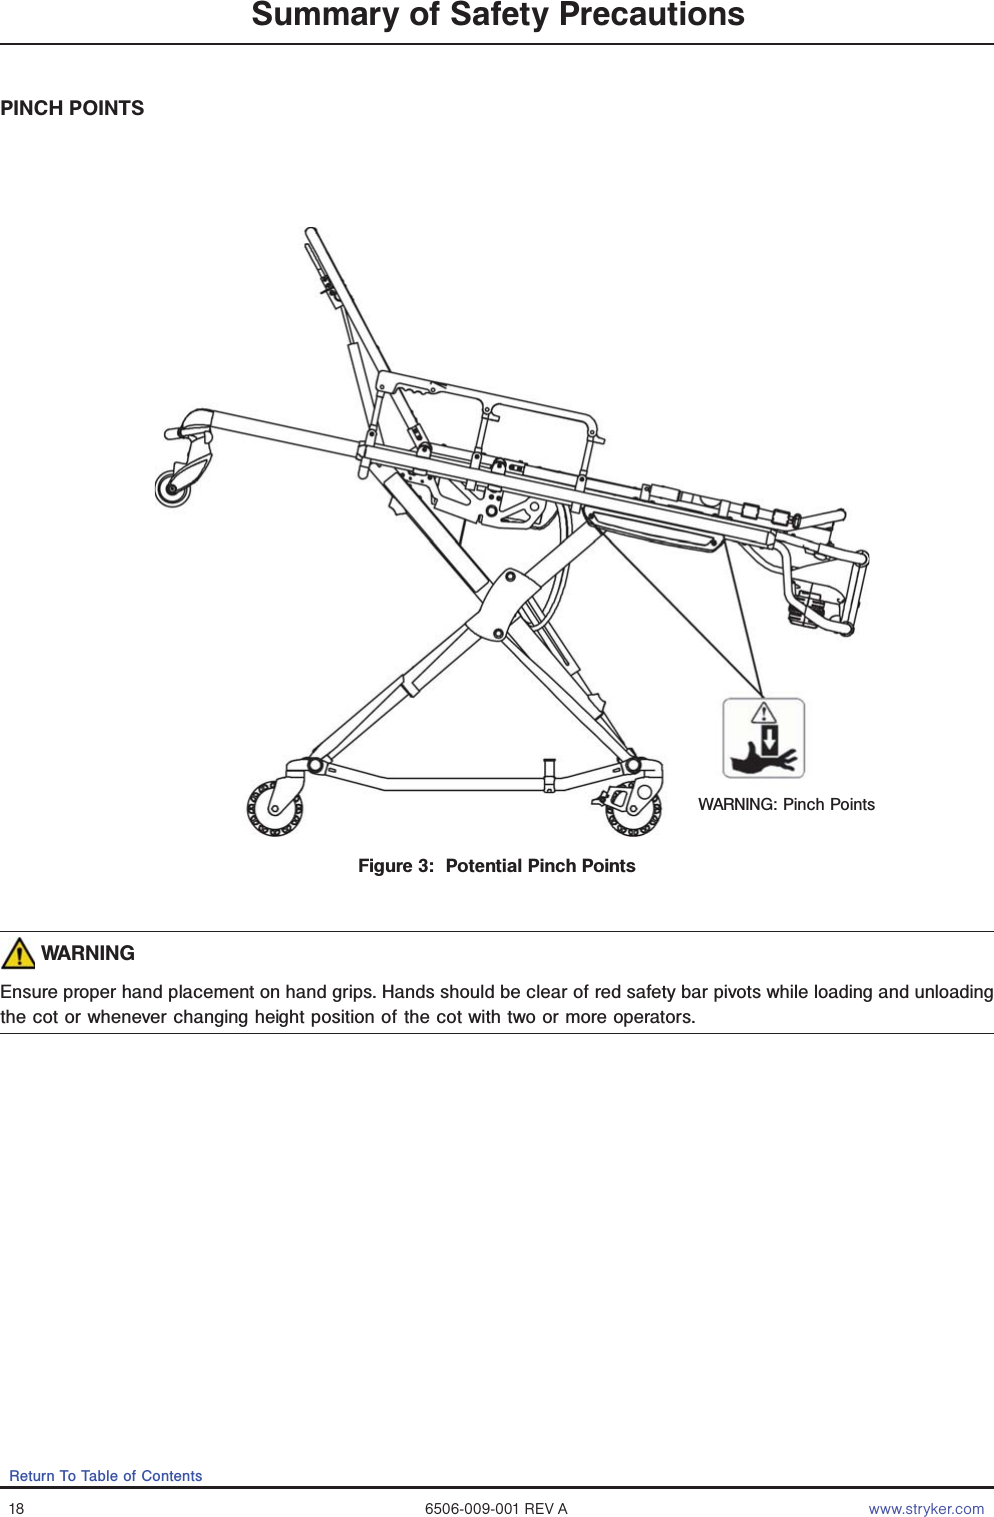 18 6506-009-001 REV A www.stryker.comReturn To Table of ContentsSummary of Safety PrecautionsFigure 3:  Potential Pinch PointsWARNING: Pinch PointsPINCH POINTS WARNINGEnsure proper hand placement on hand grips. Hands should be clear of red safety bar pivots while loading and unloading the cot or whenever changing height position of the cot with two or more operators.